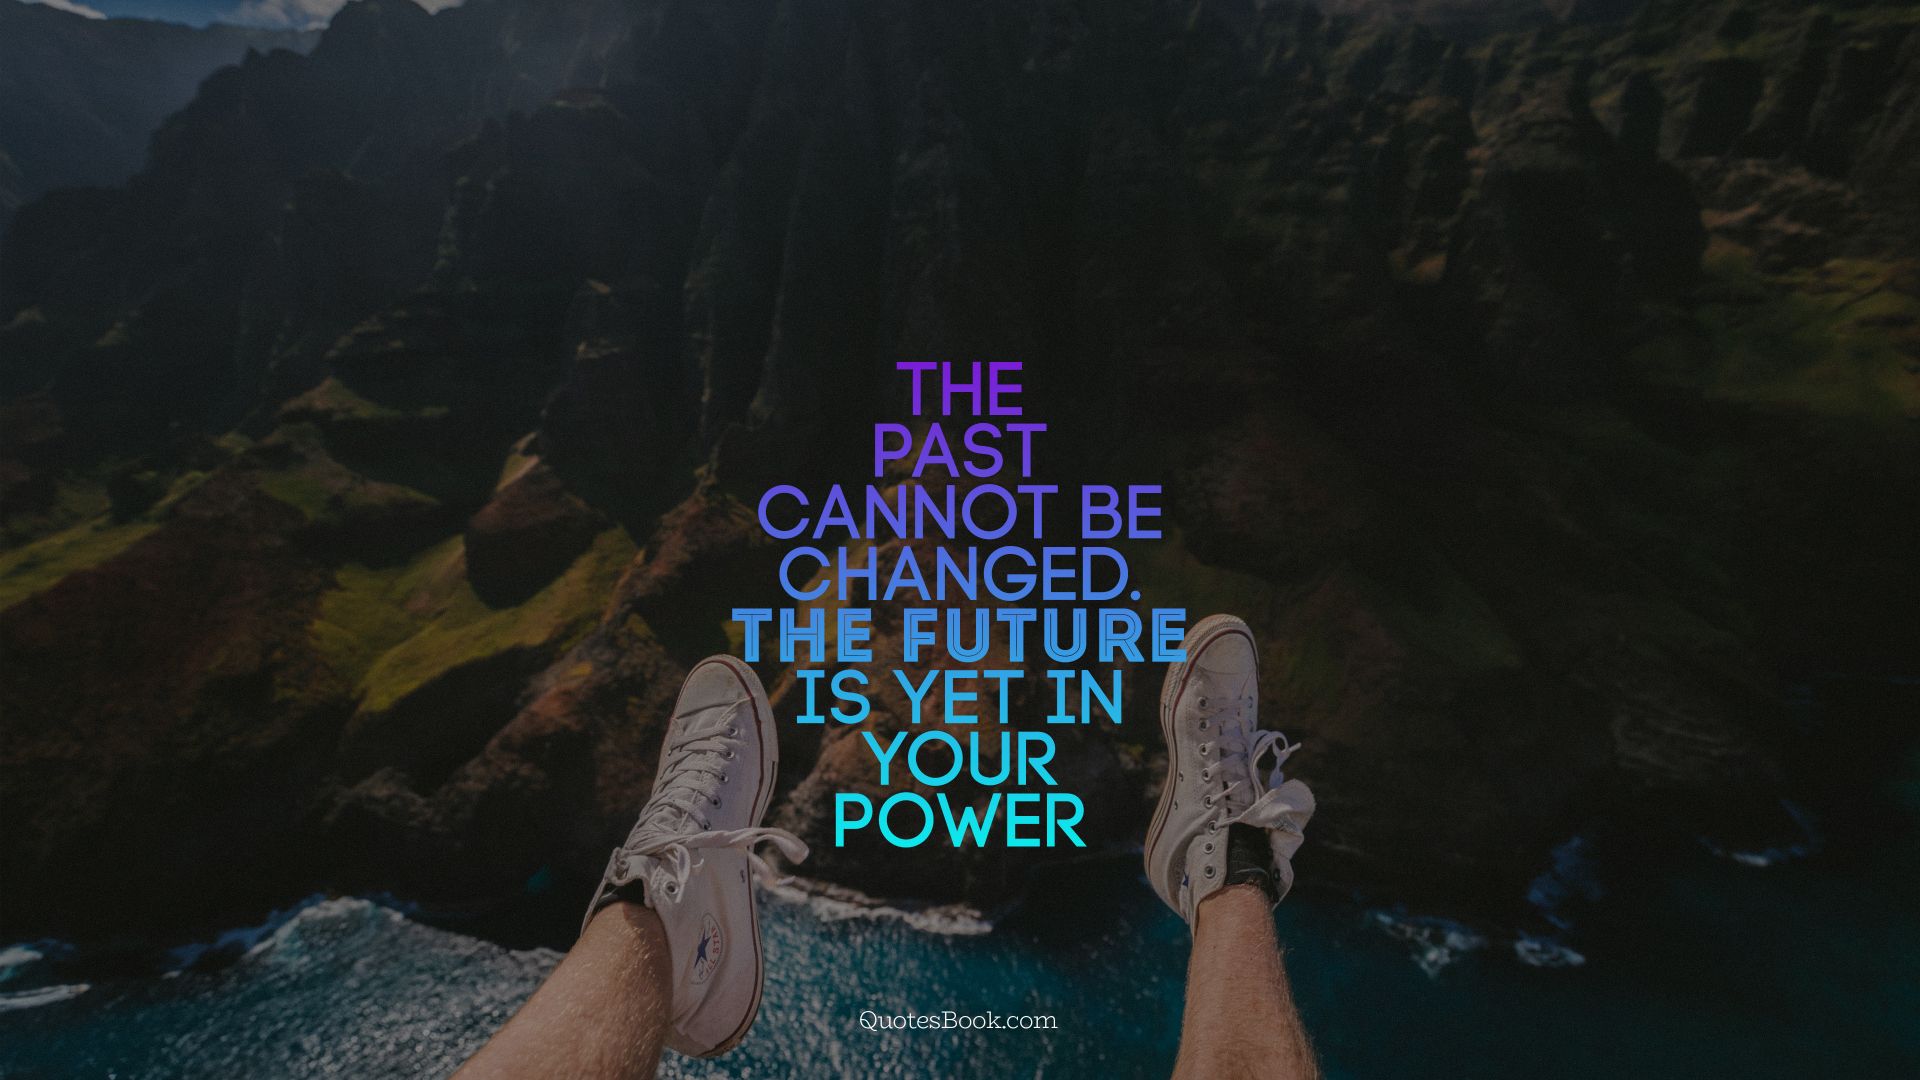 The past cannot be changed. The future is yet in your power